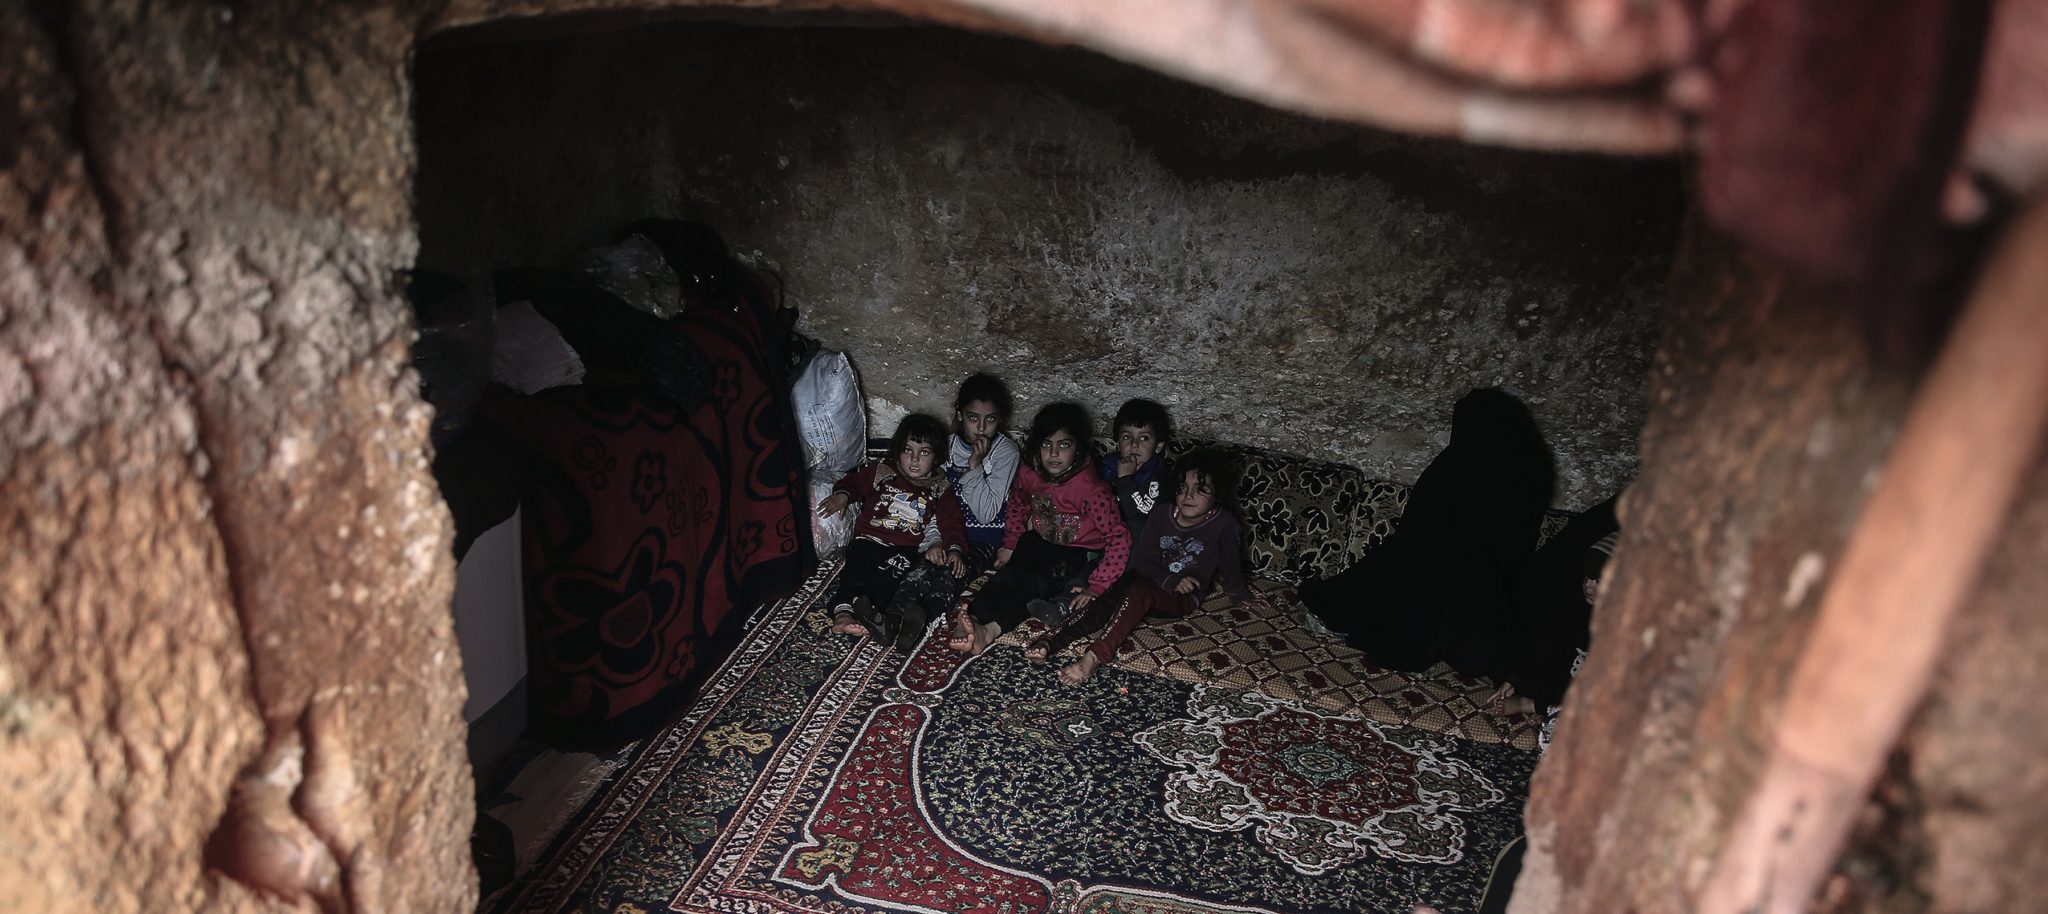 Syrian children are pictured inside a cave